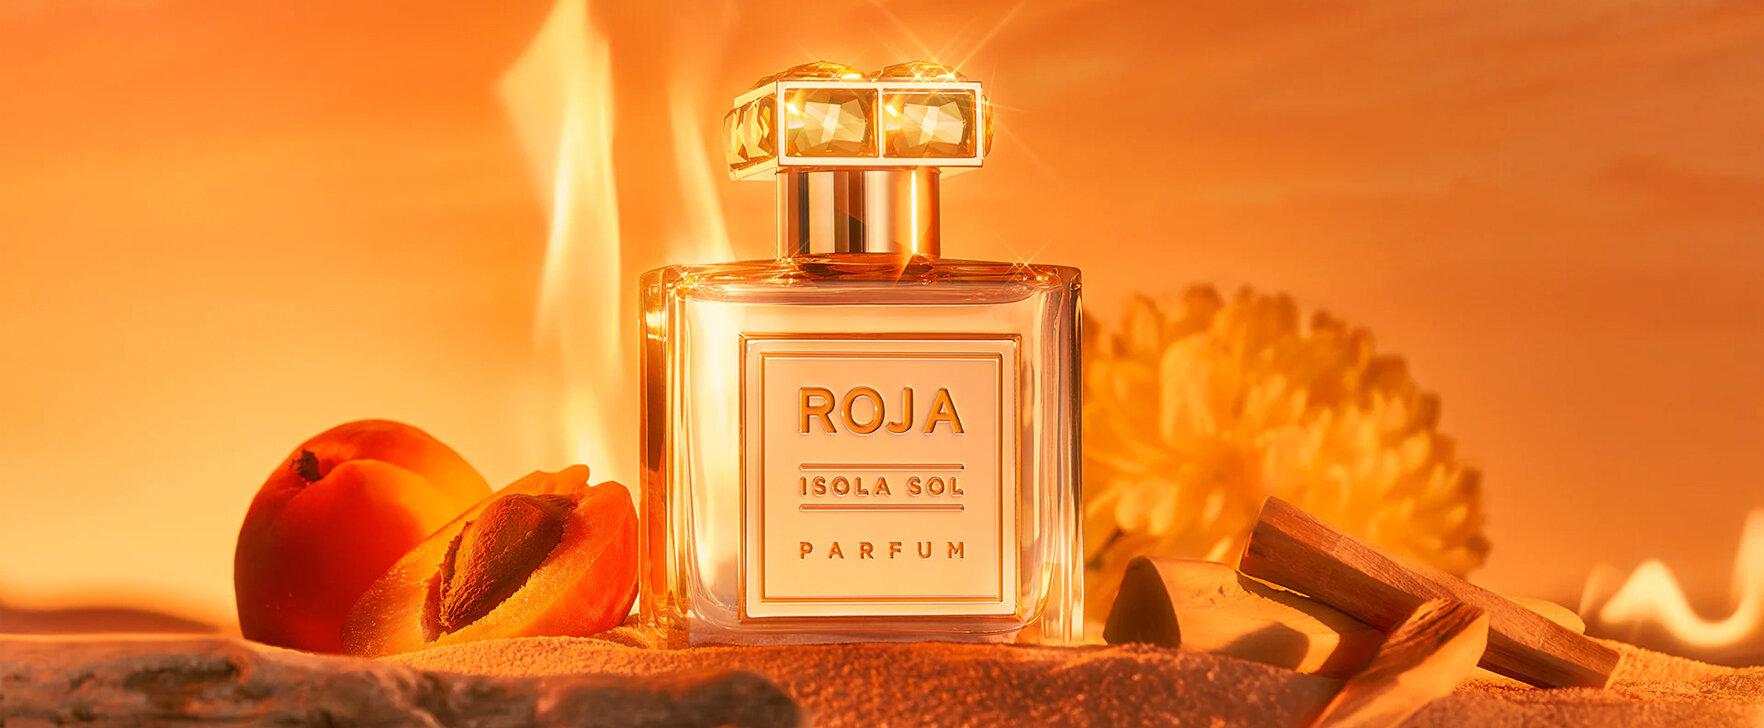 An Tribute to the Island Sun: "Isola Sol" by Roja Parfums